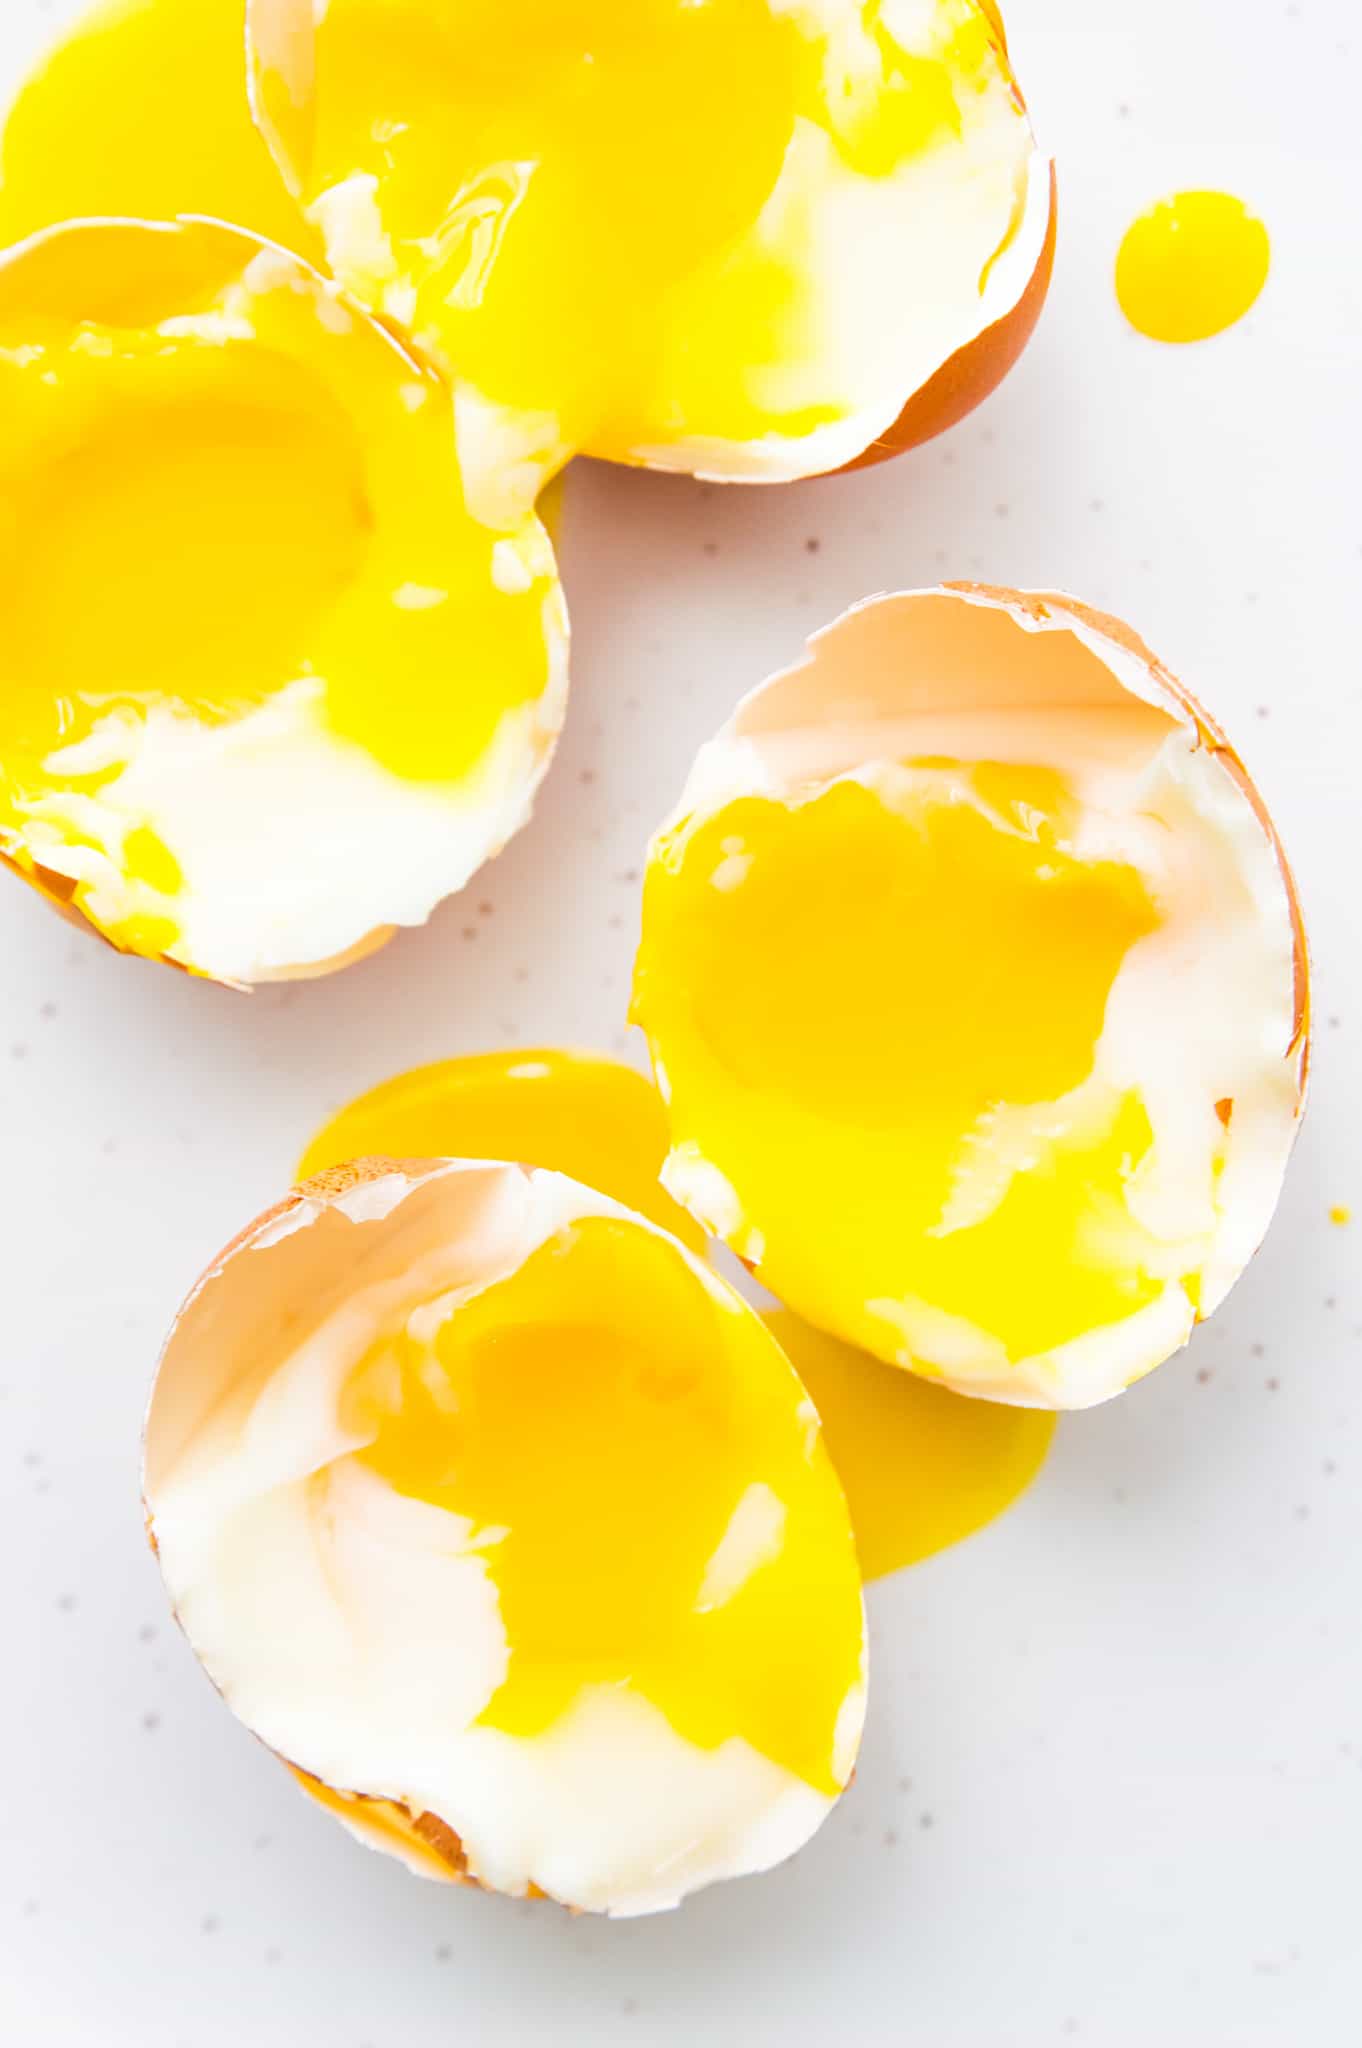 Soft boiled eggs on a white plate still in the shell.